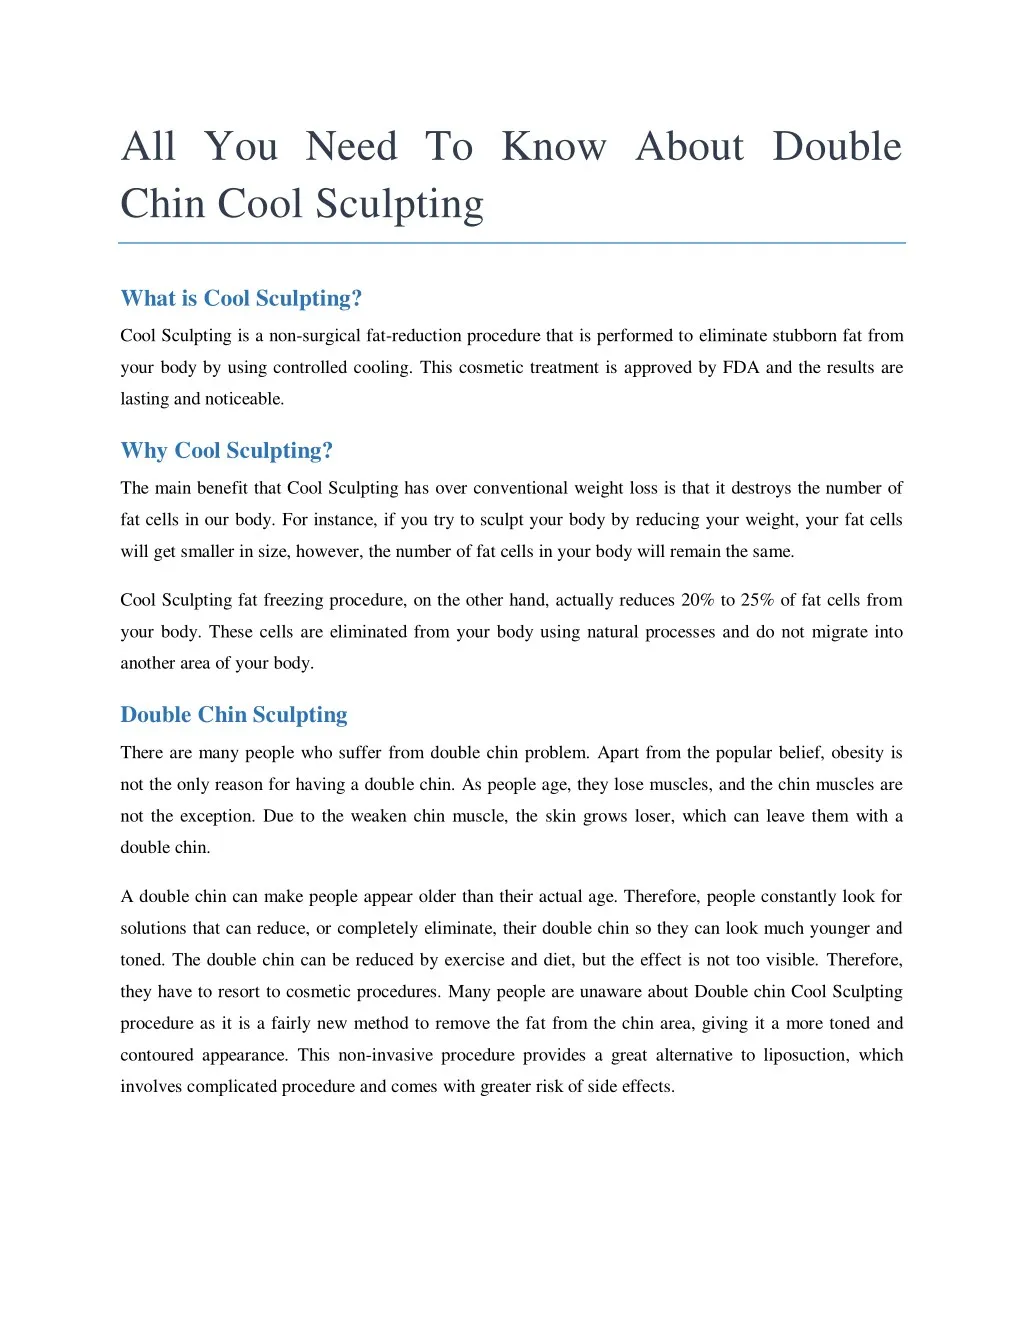 all you need to know about double chin cool